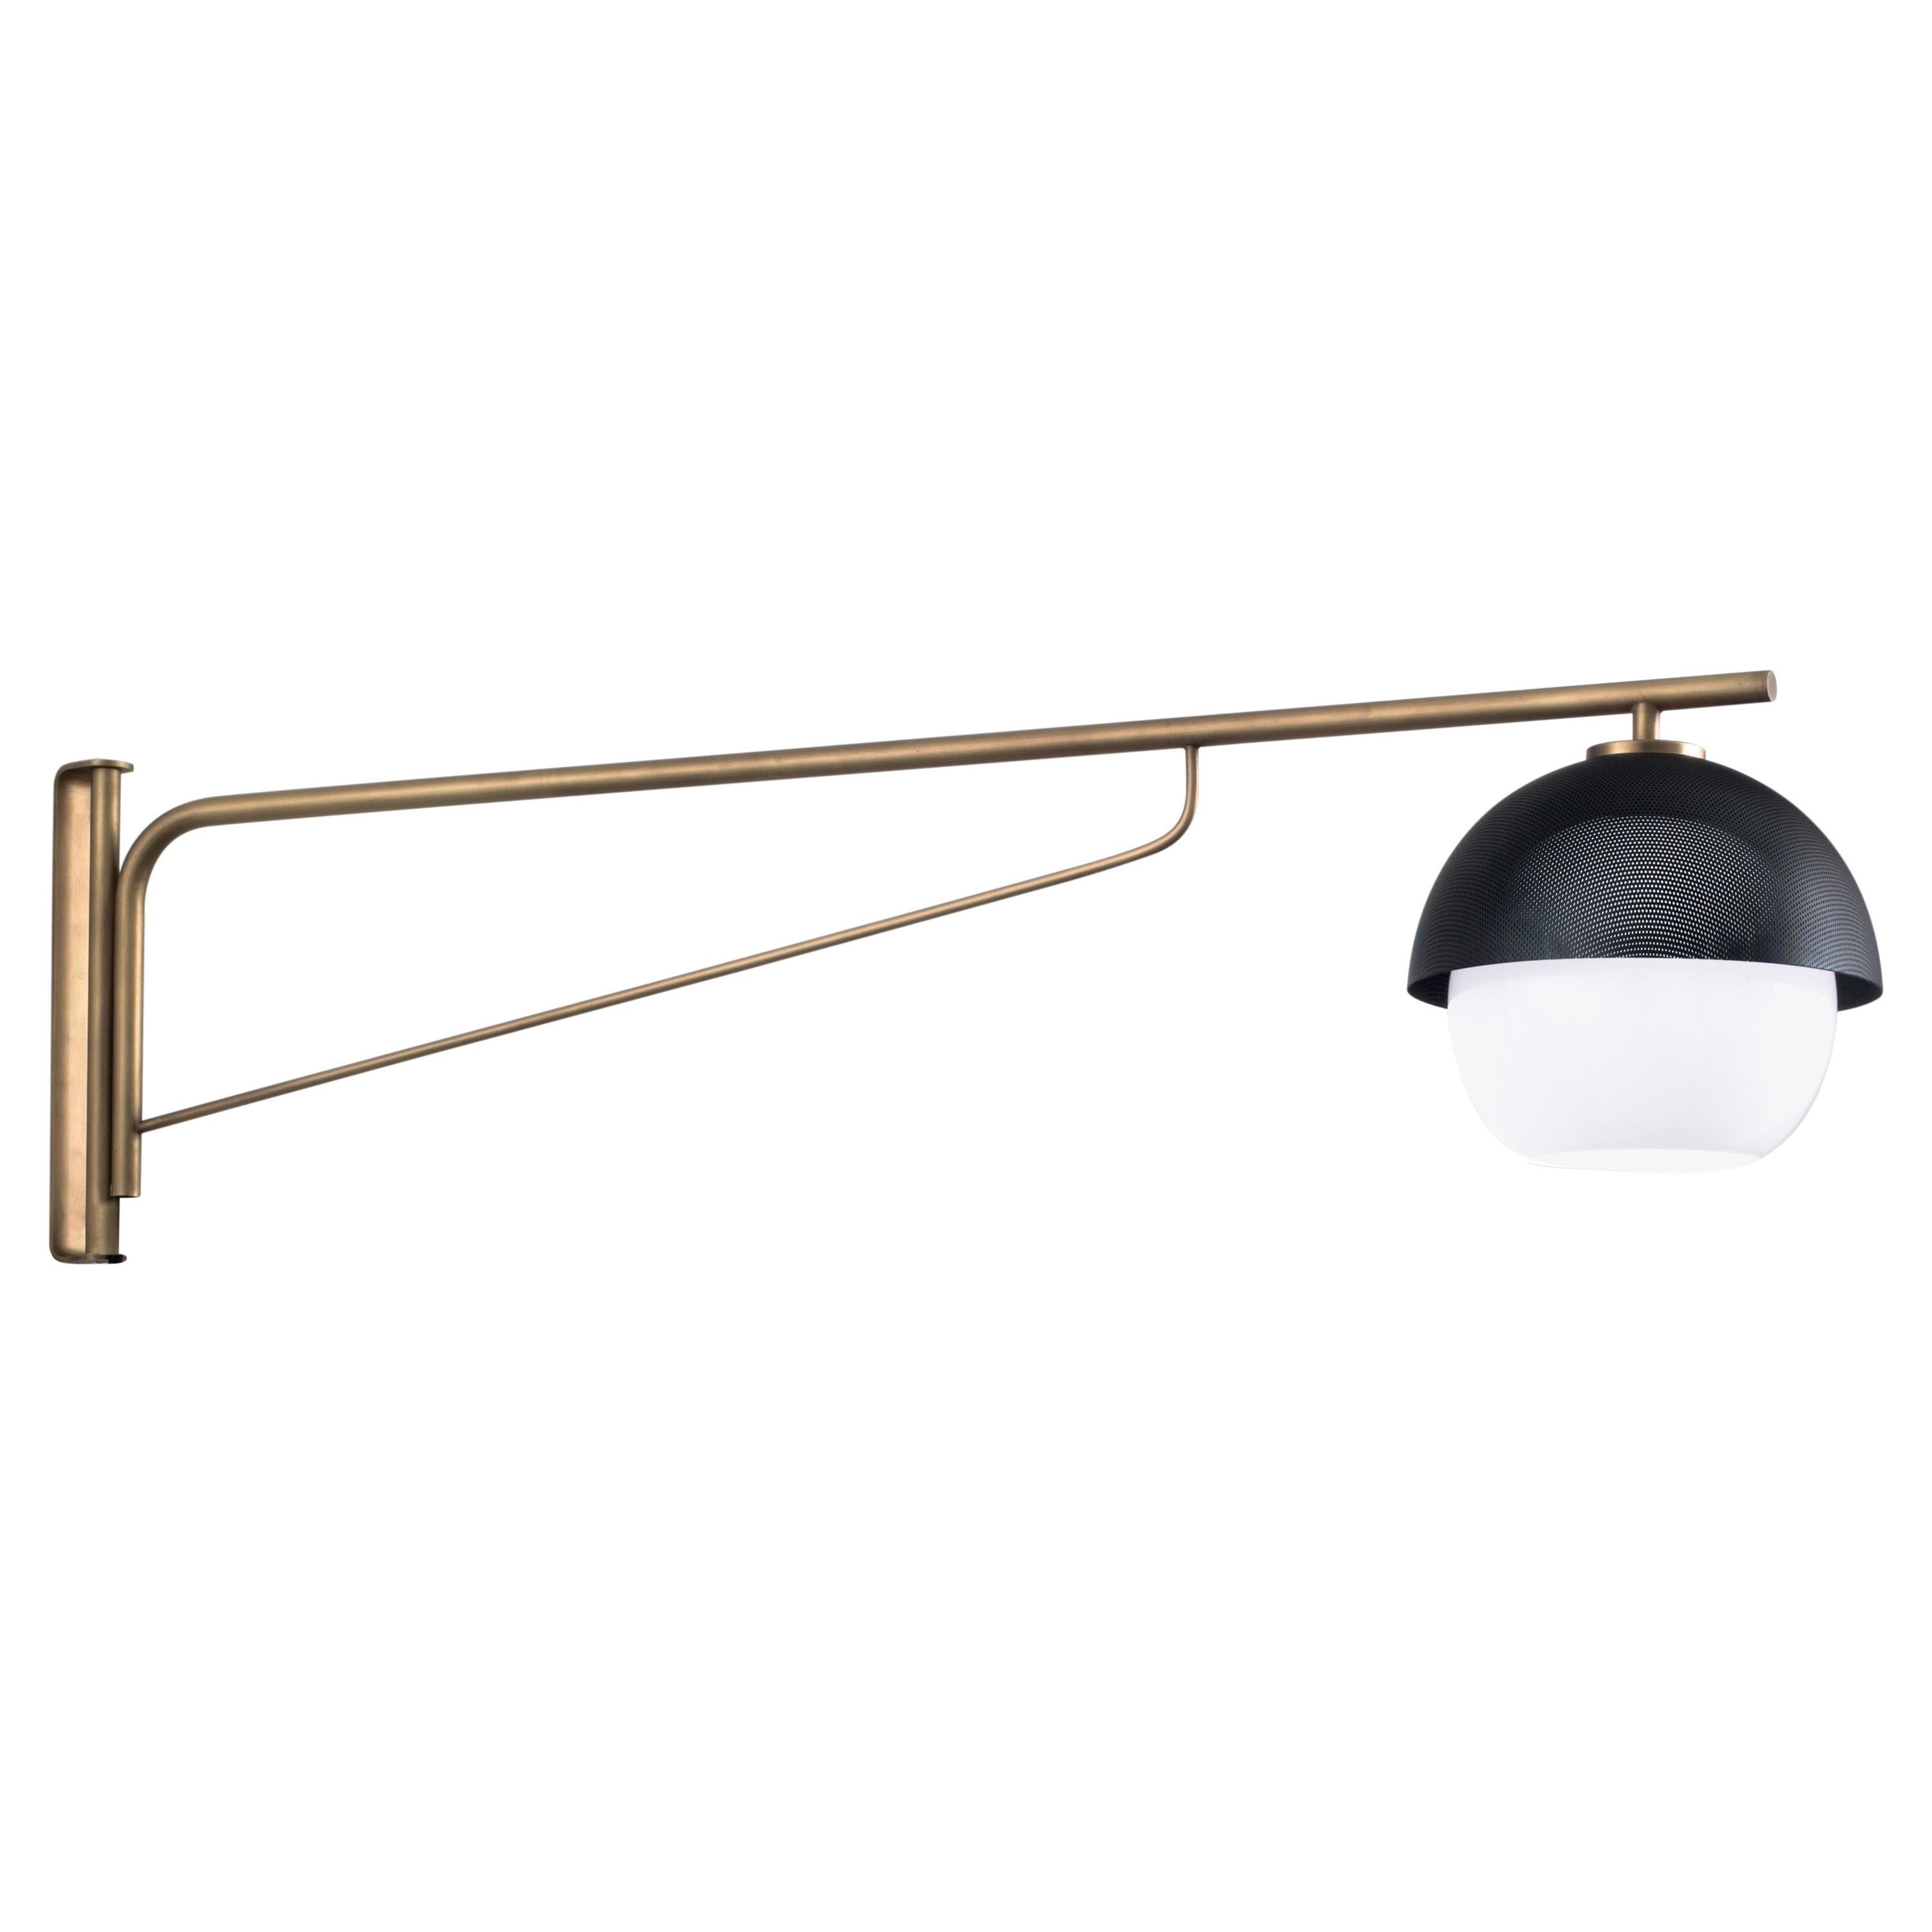 VeniceM Urban Turn Arm Wall Light in Light Burnished Brass by Massimo Tonetto